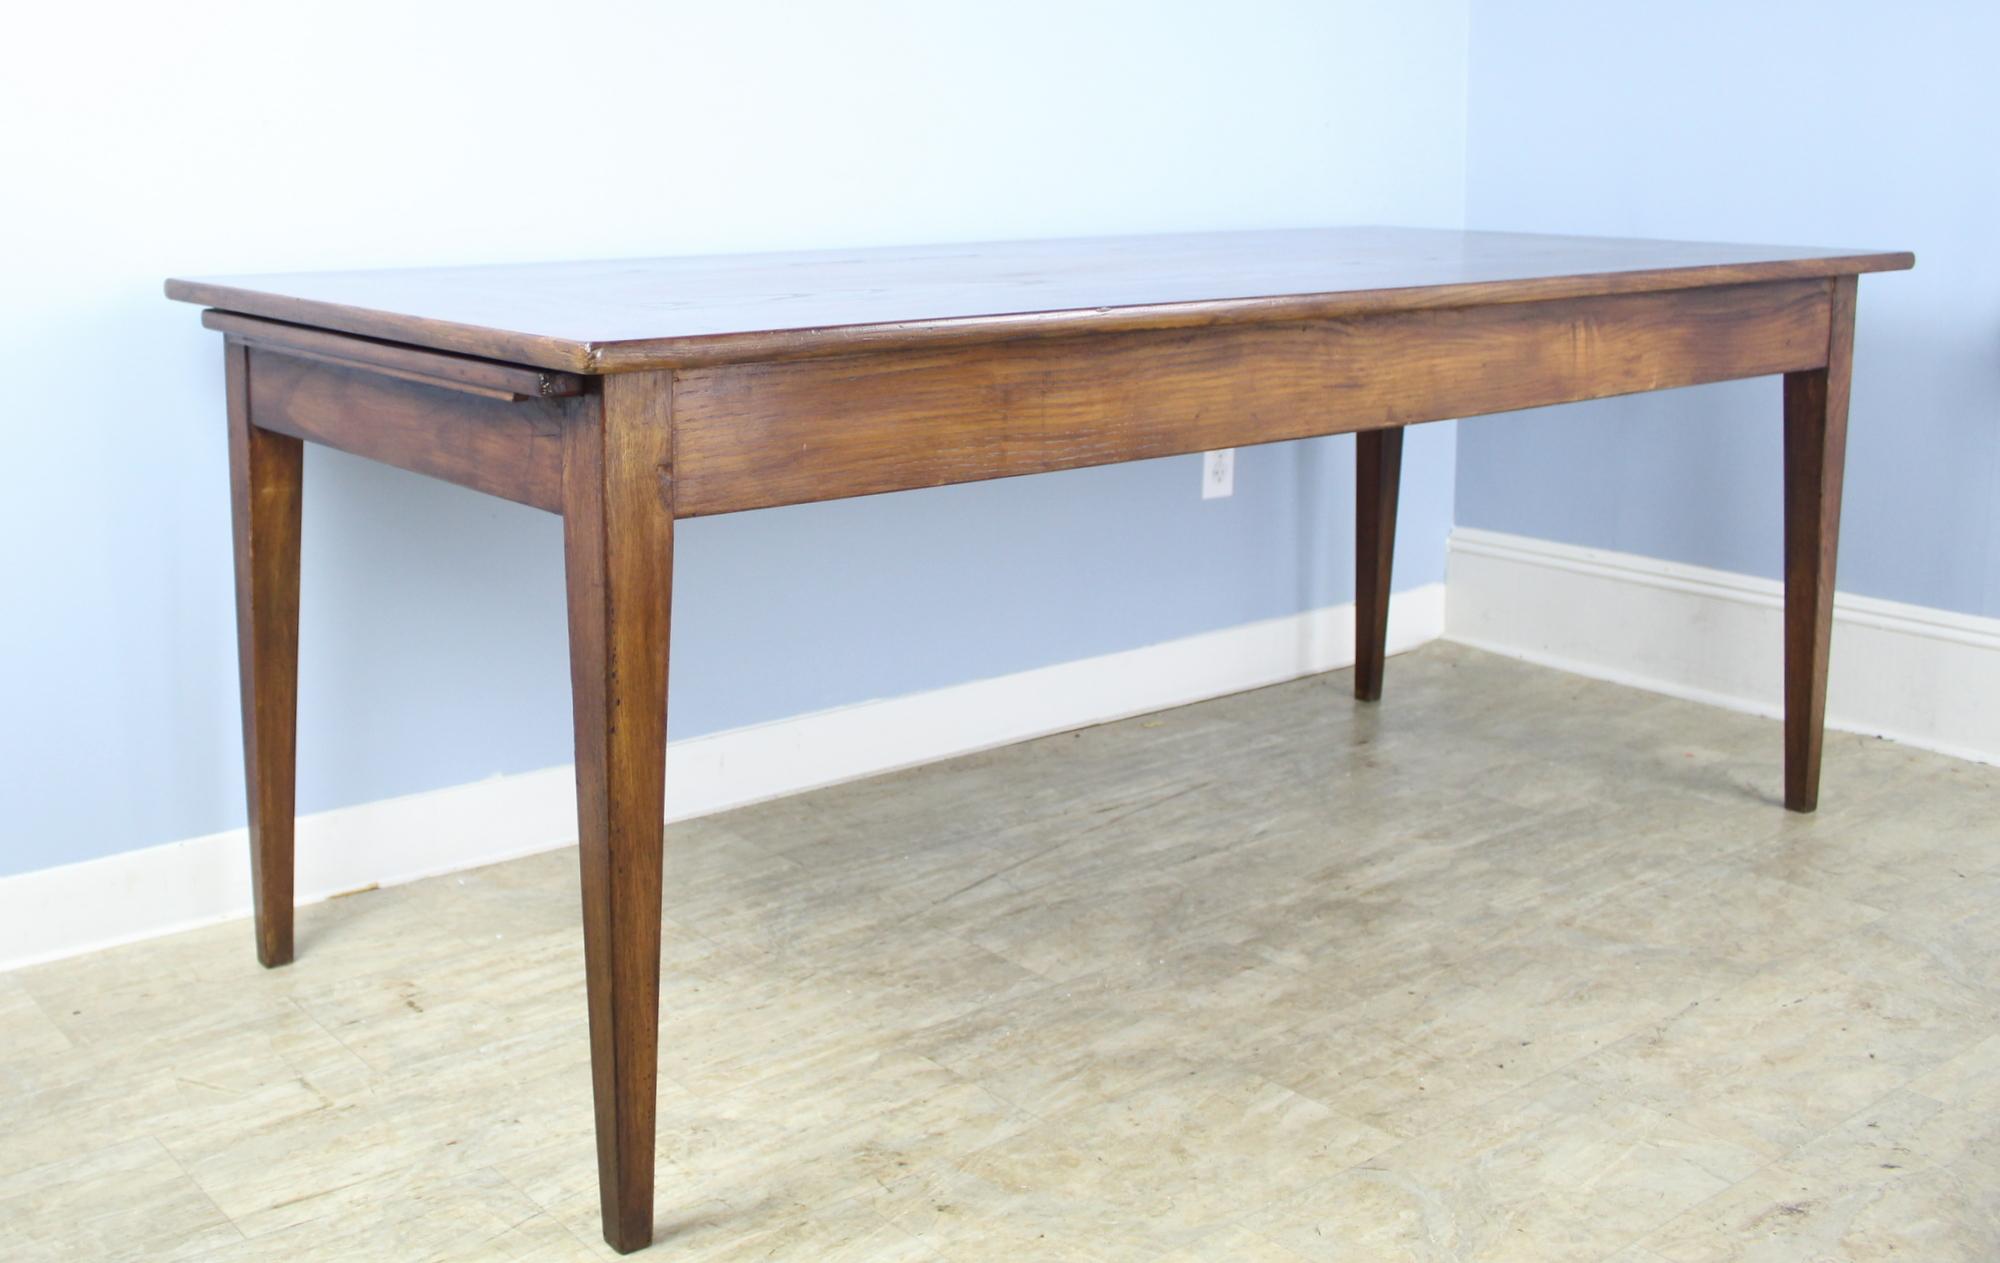 A fabulous clean simple, almost modern farm table in mellow oak. The top has lovely grain and interesting mitred corners, as well as a well preserved bread slide that is sturdy enough for side dishes or extra seating. With 71.25 inches between the